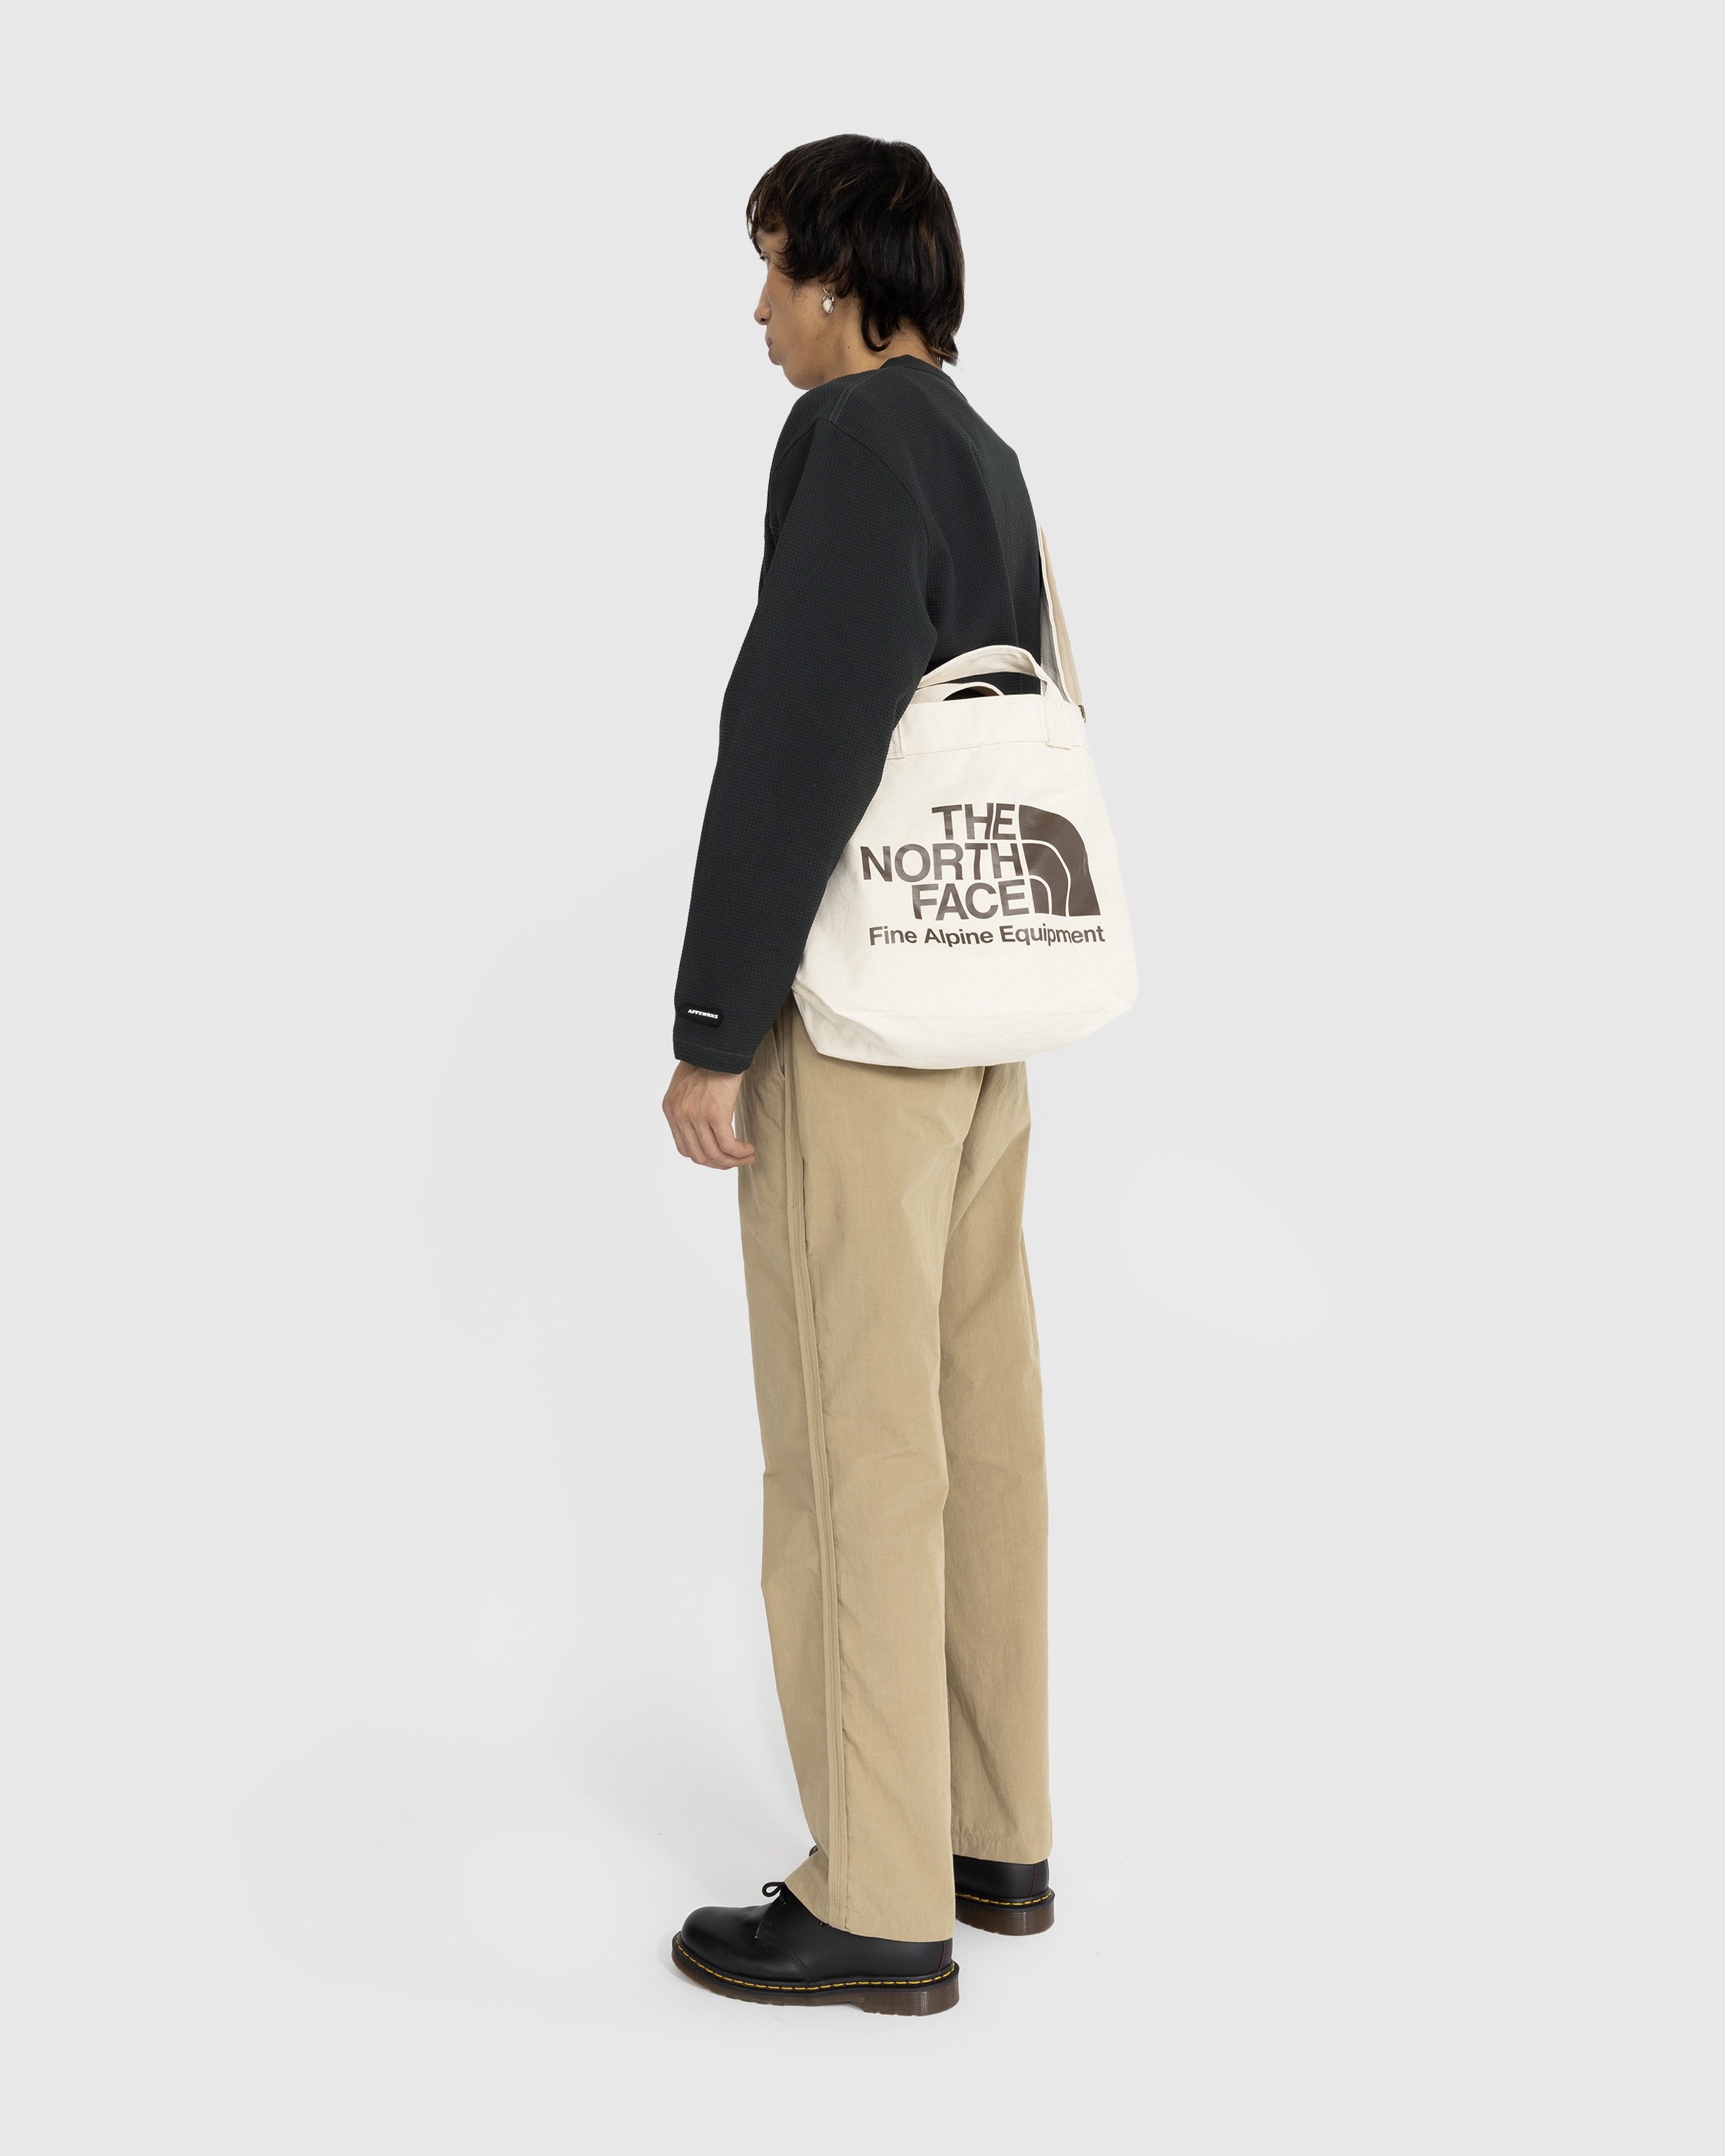 The North Face - Adjustable Cotton Tote Bag Beige - Accessories - Multi - Image 6